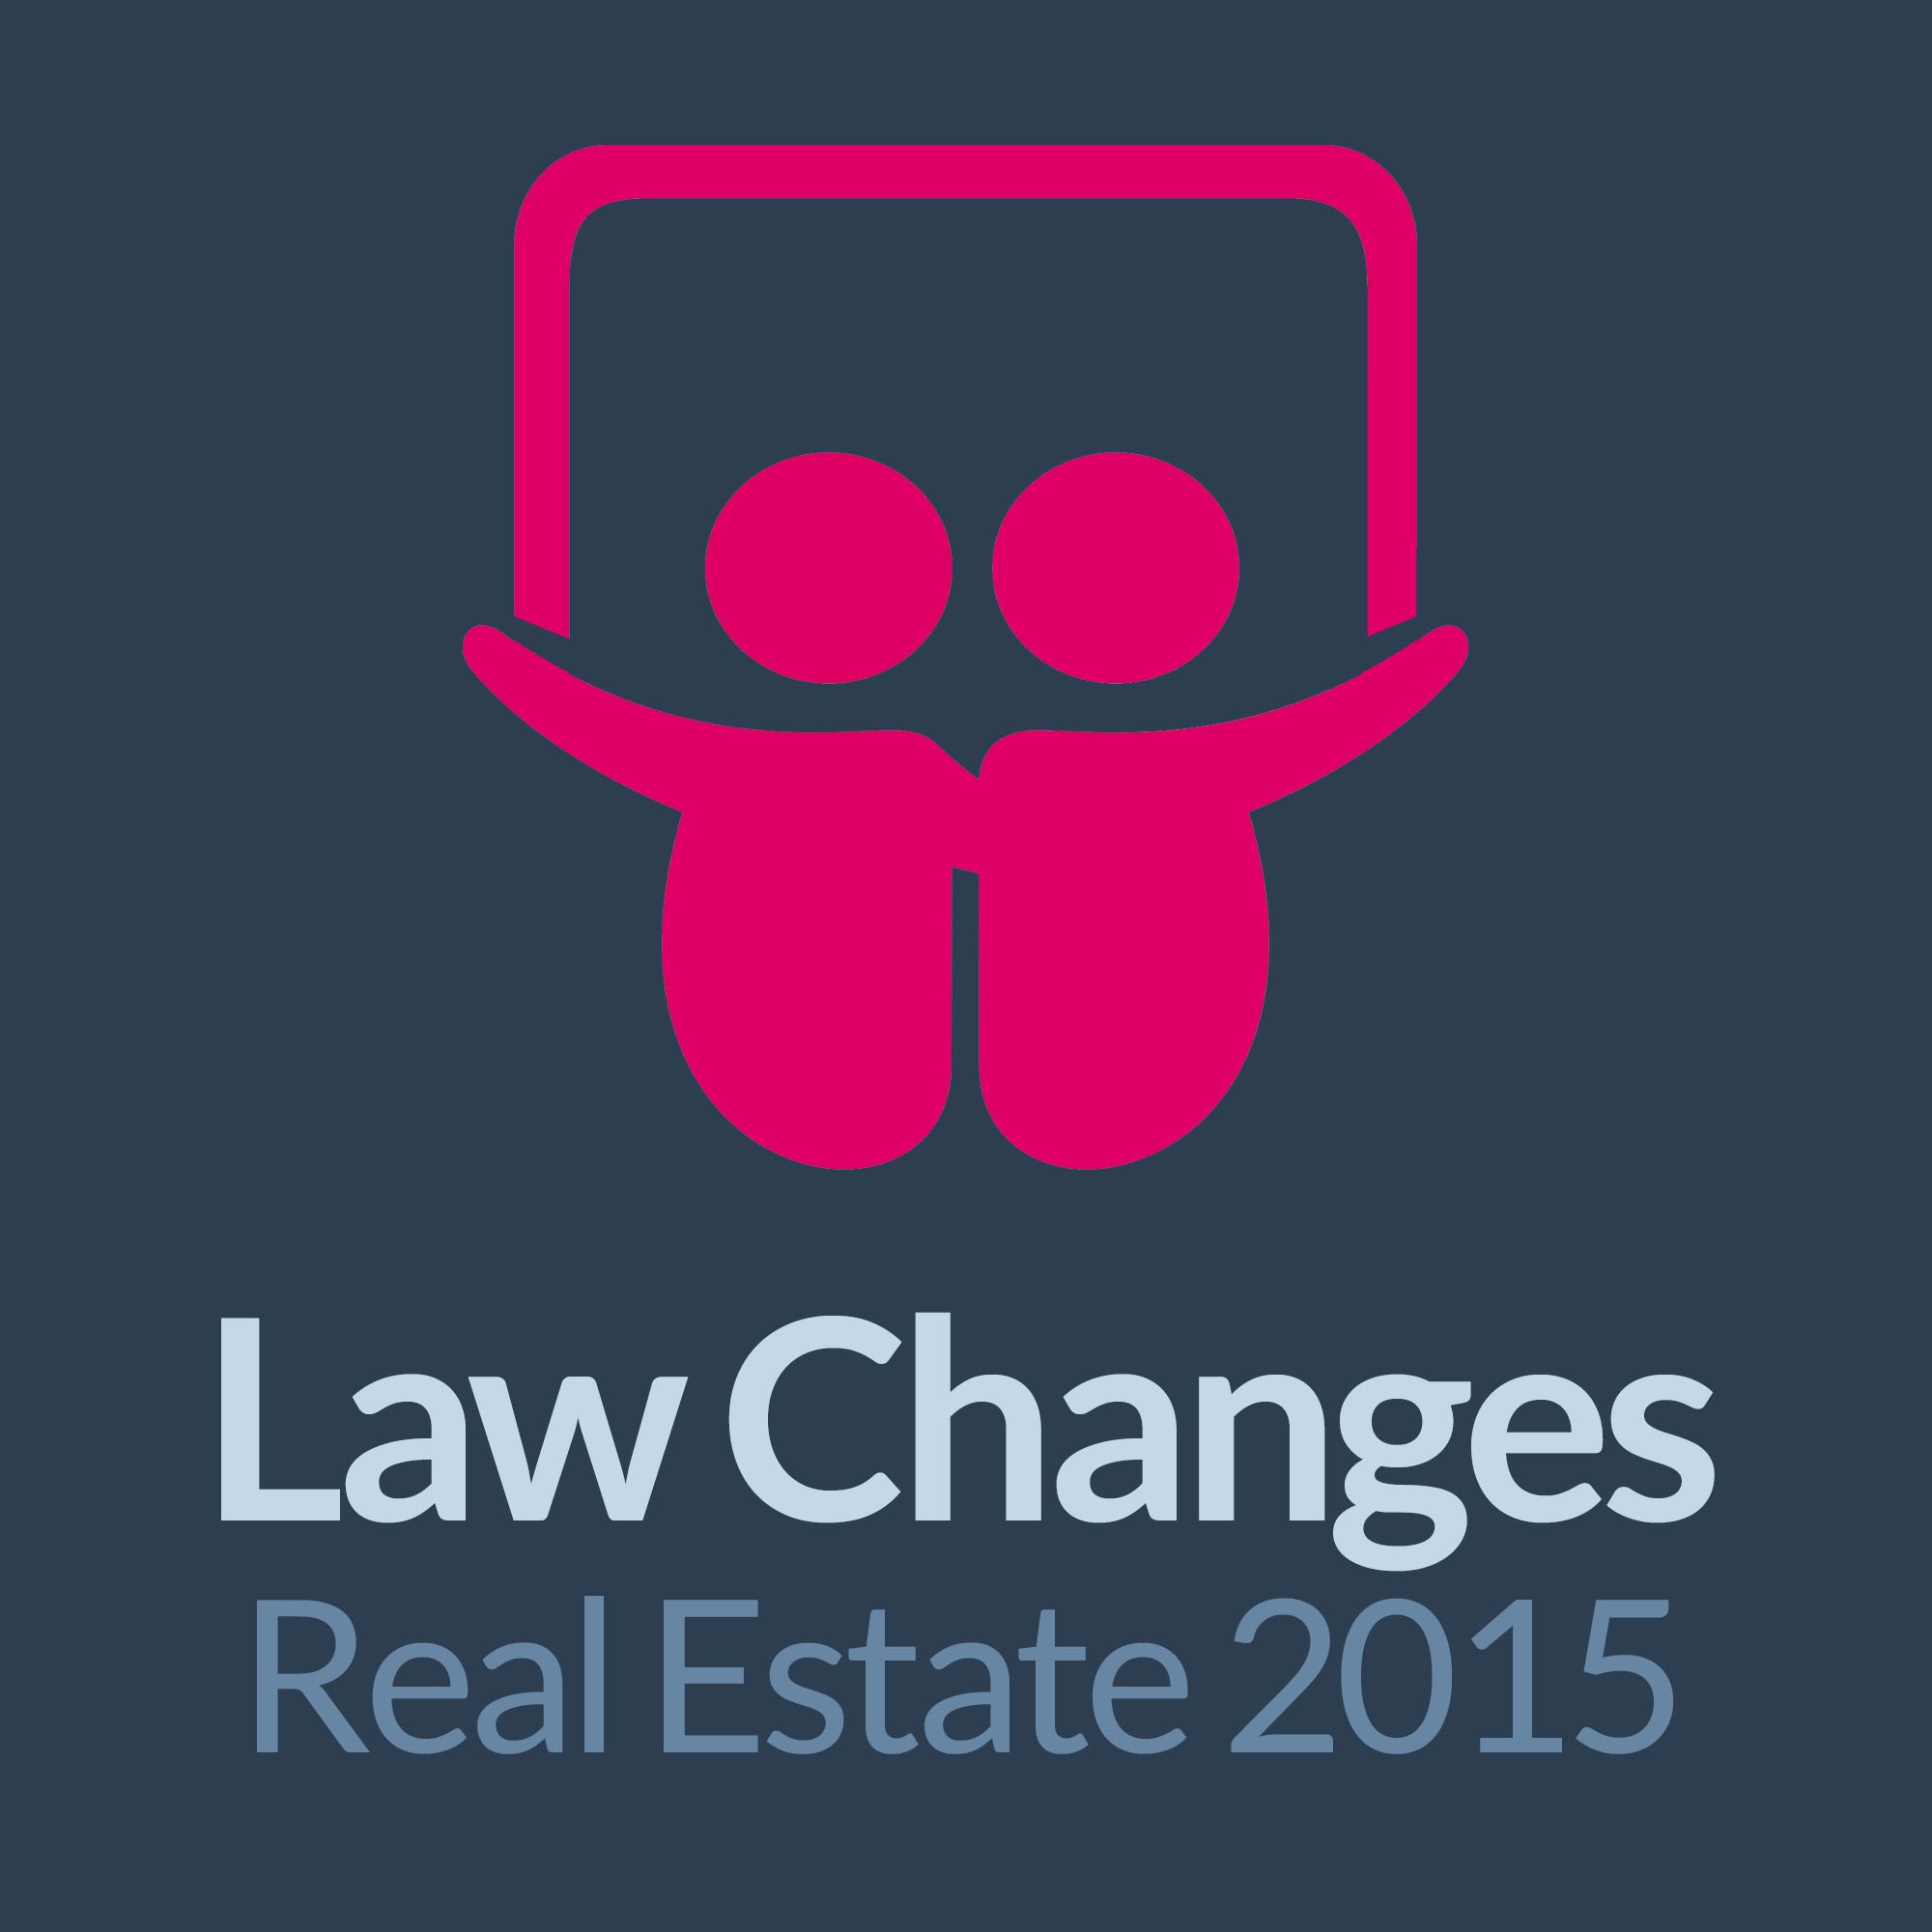 Major Real Estate Law Changes in 2015